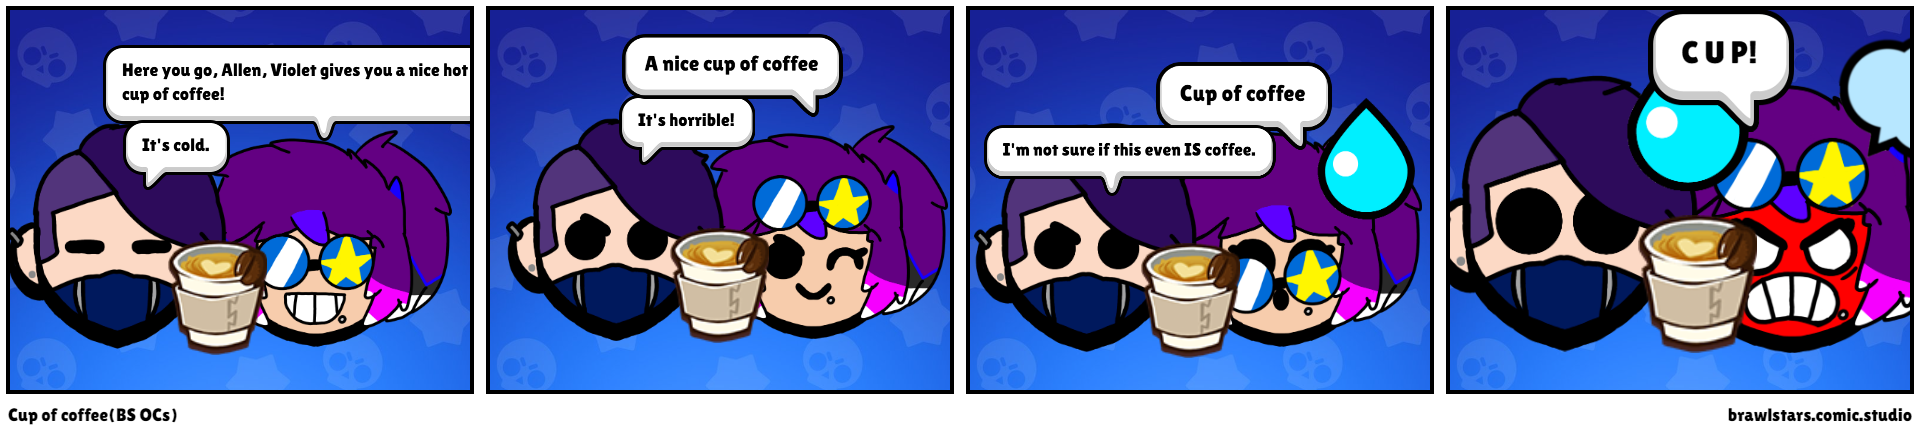 Cup of coffee(BS OCs)